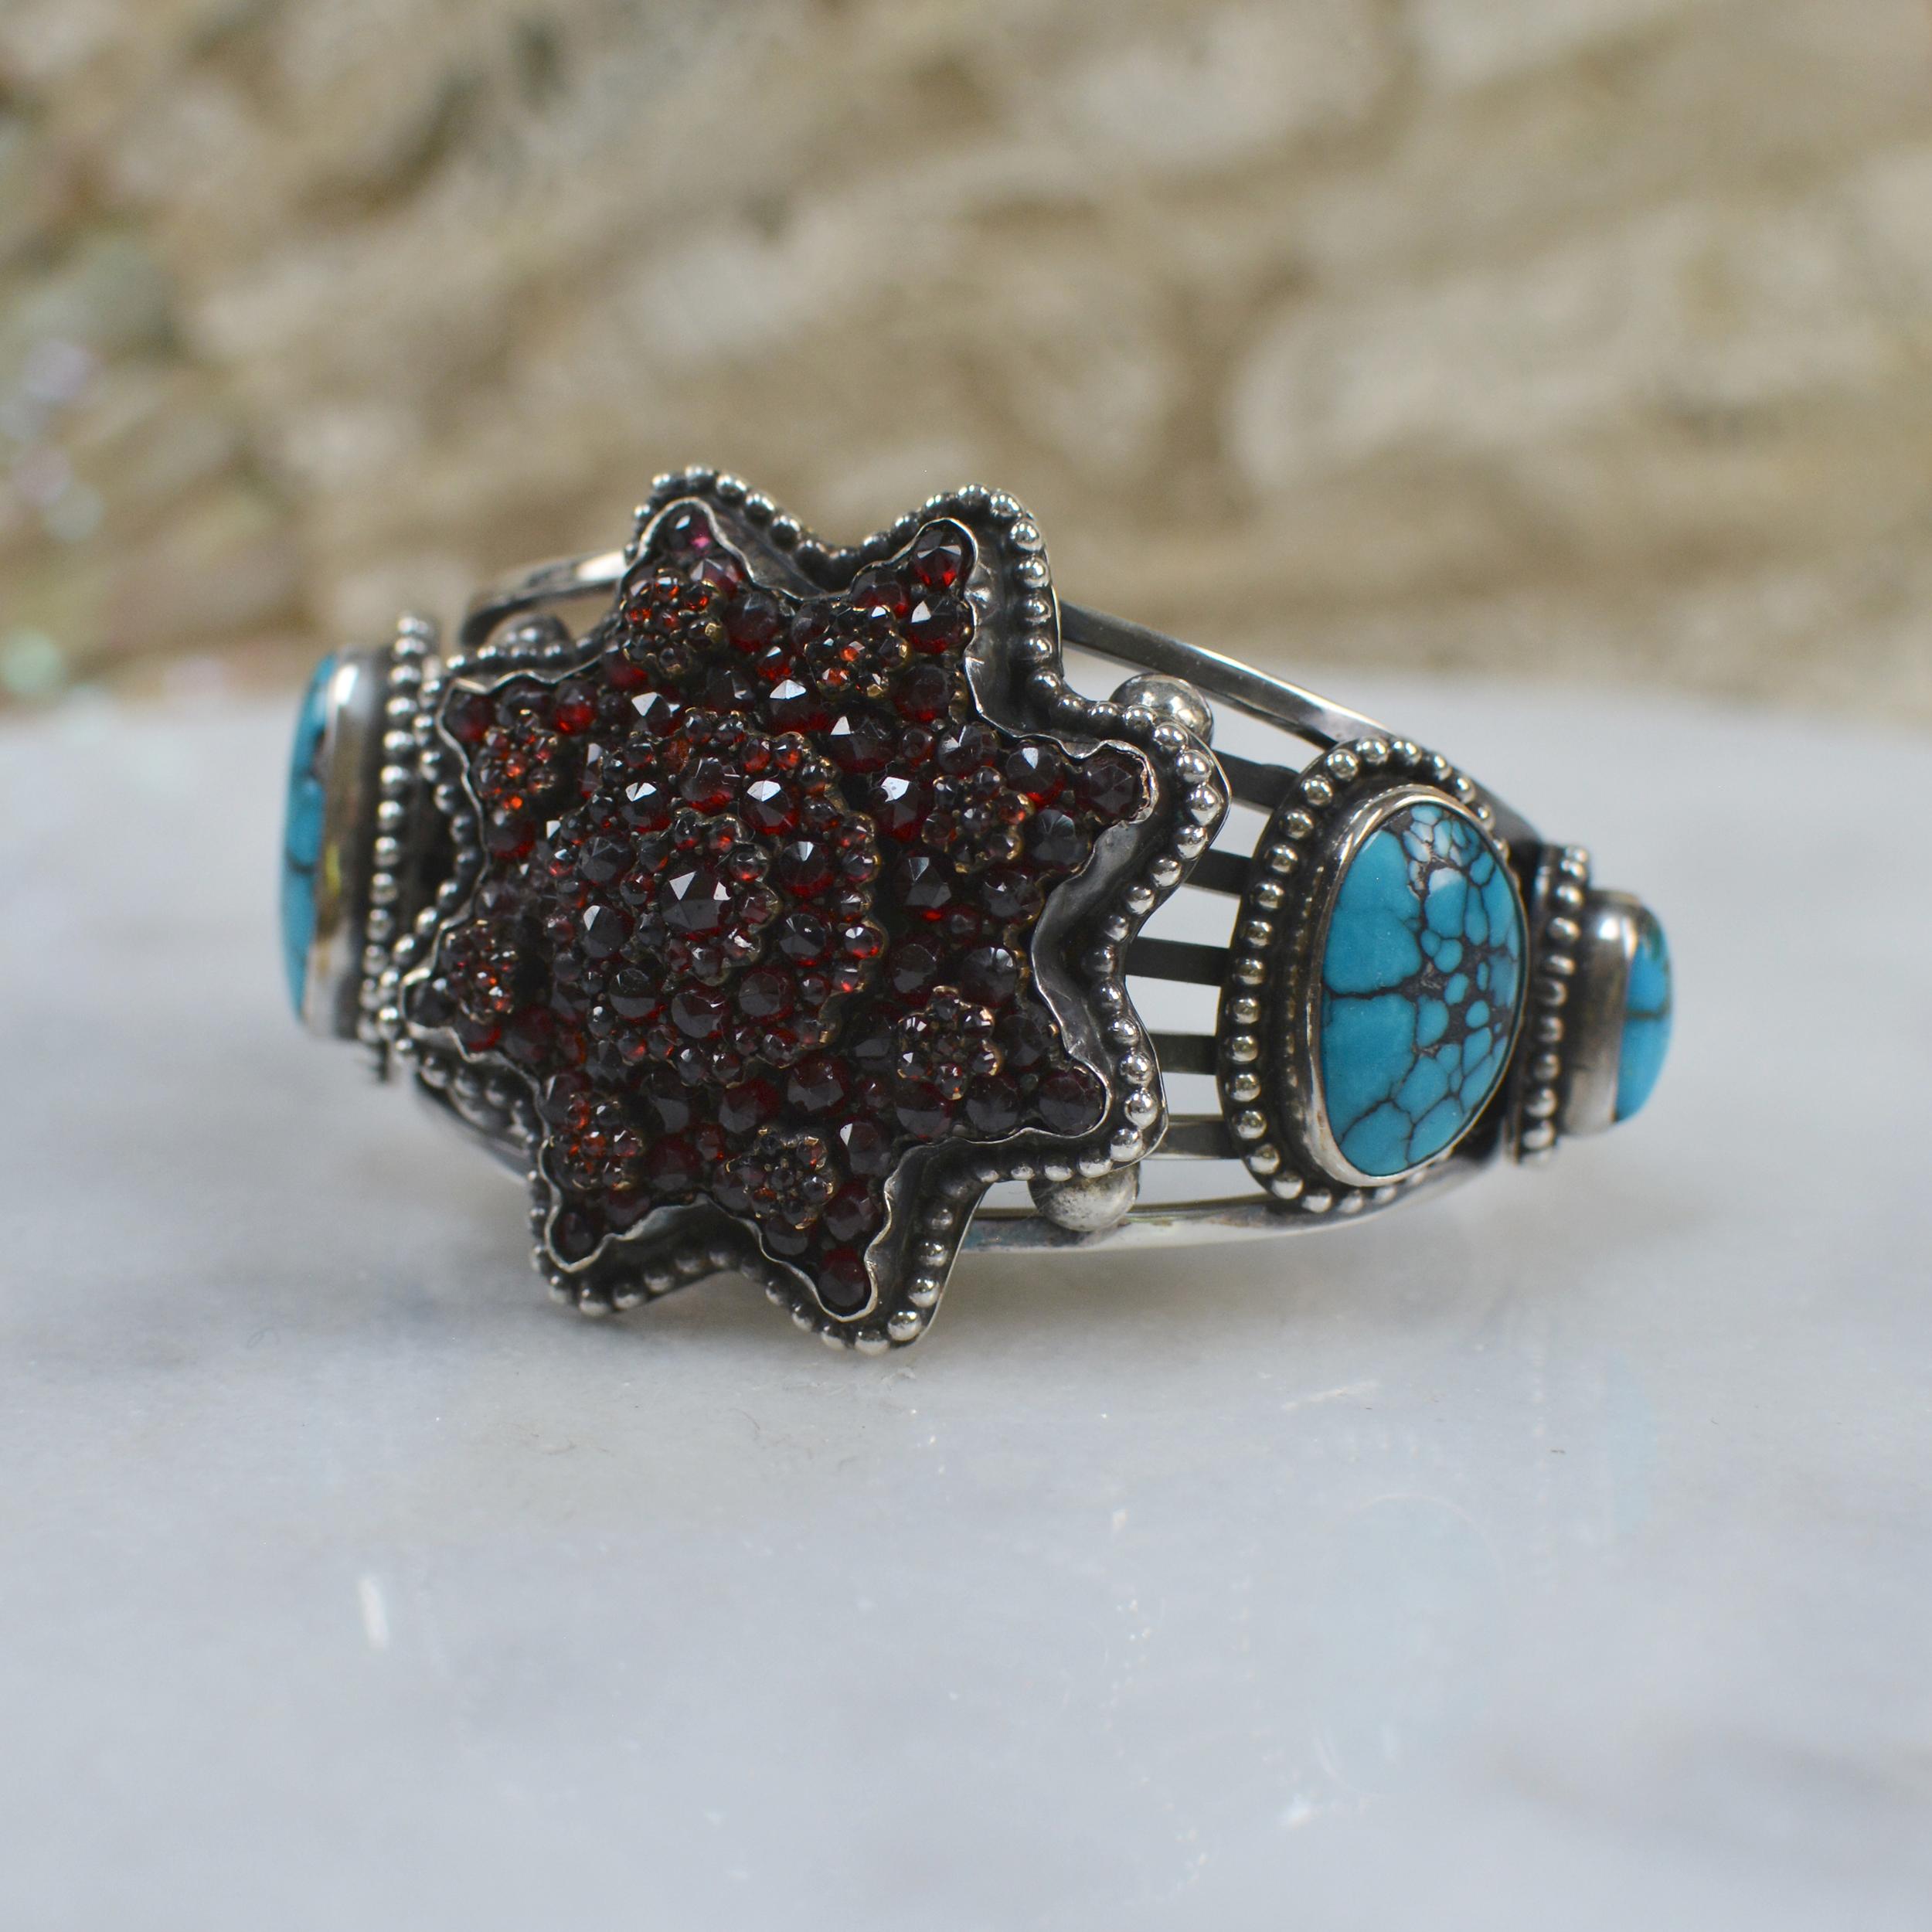 This important Jill Garber cuff bracelet has been designed and created to feature a wonderful nineteenth century antique Victorian Bohemian garnet star. All rose cut natural garnets are mounted in original old gold vermeil prong mountings. This